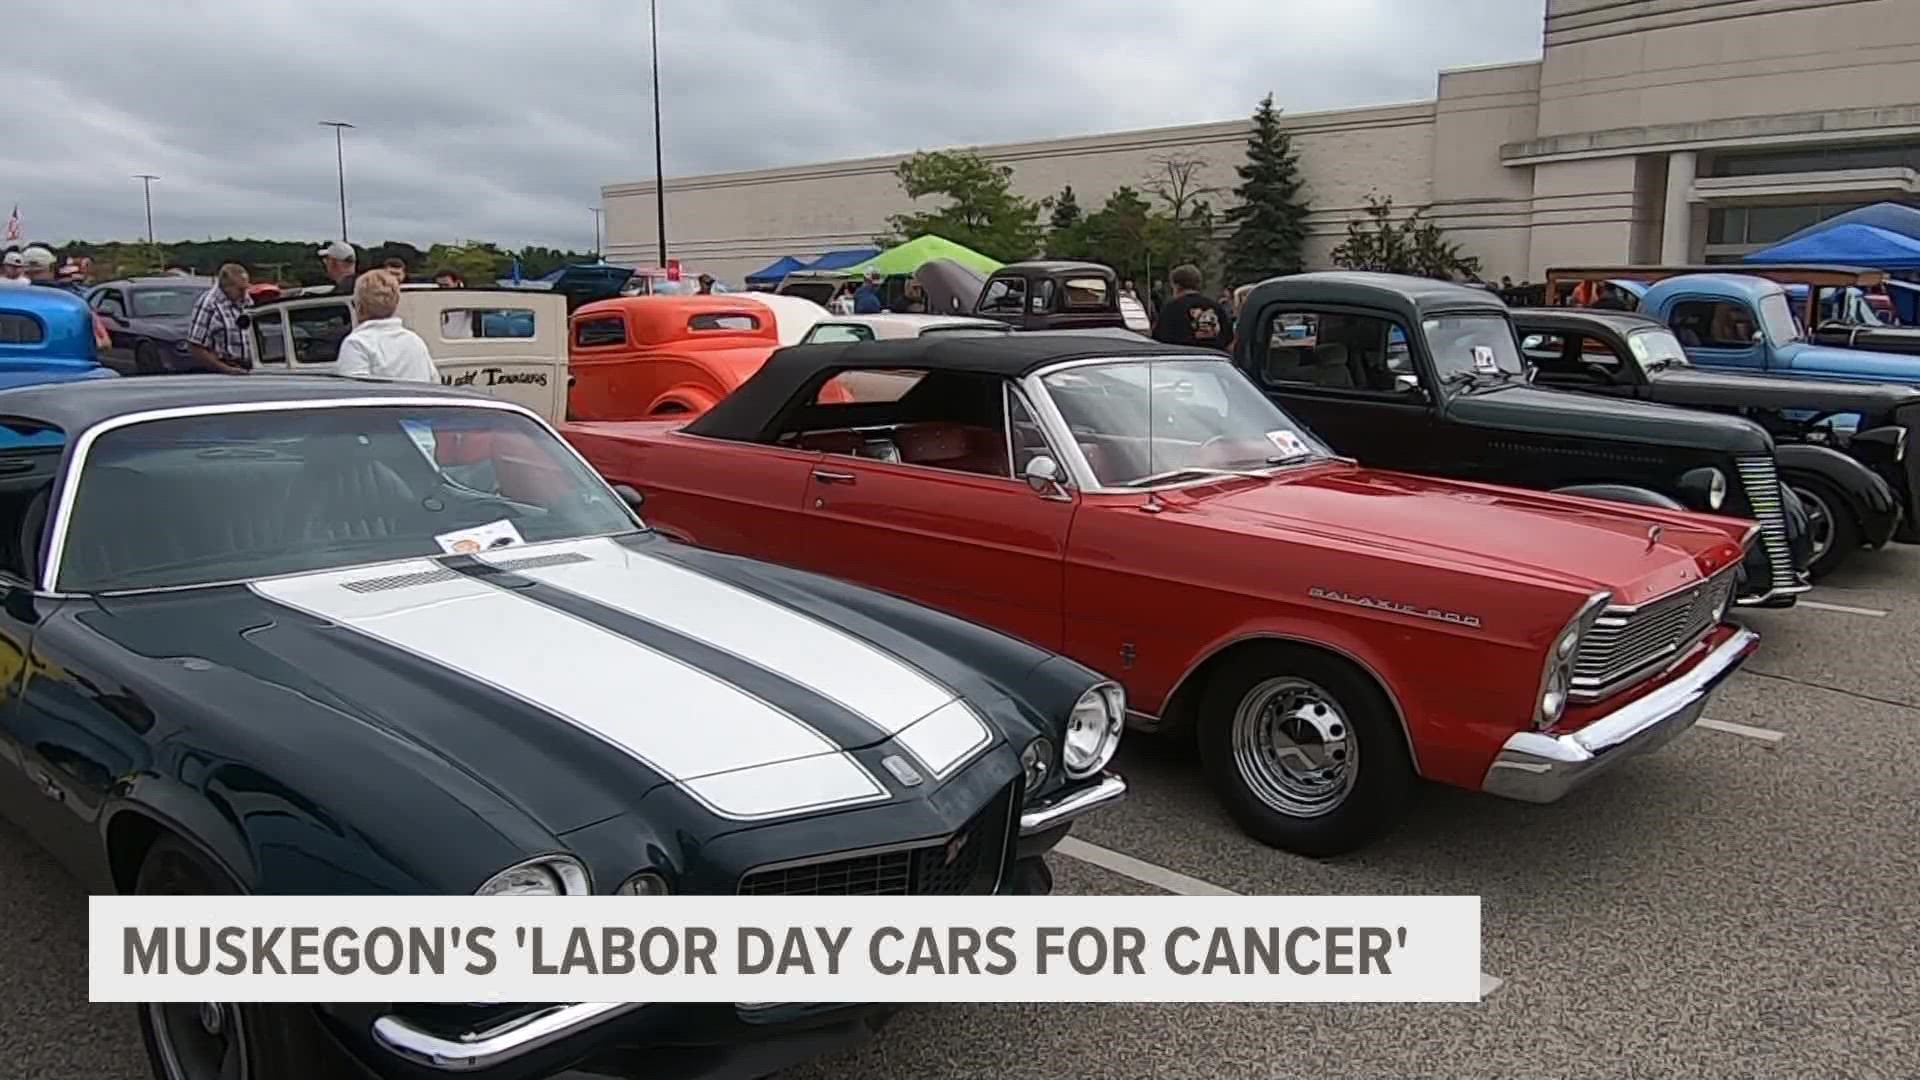 The 18th annual 'Muskegon's Labor Day Cars for Cancer' drew thousands to Fruitport Monday.